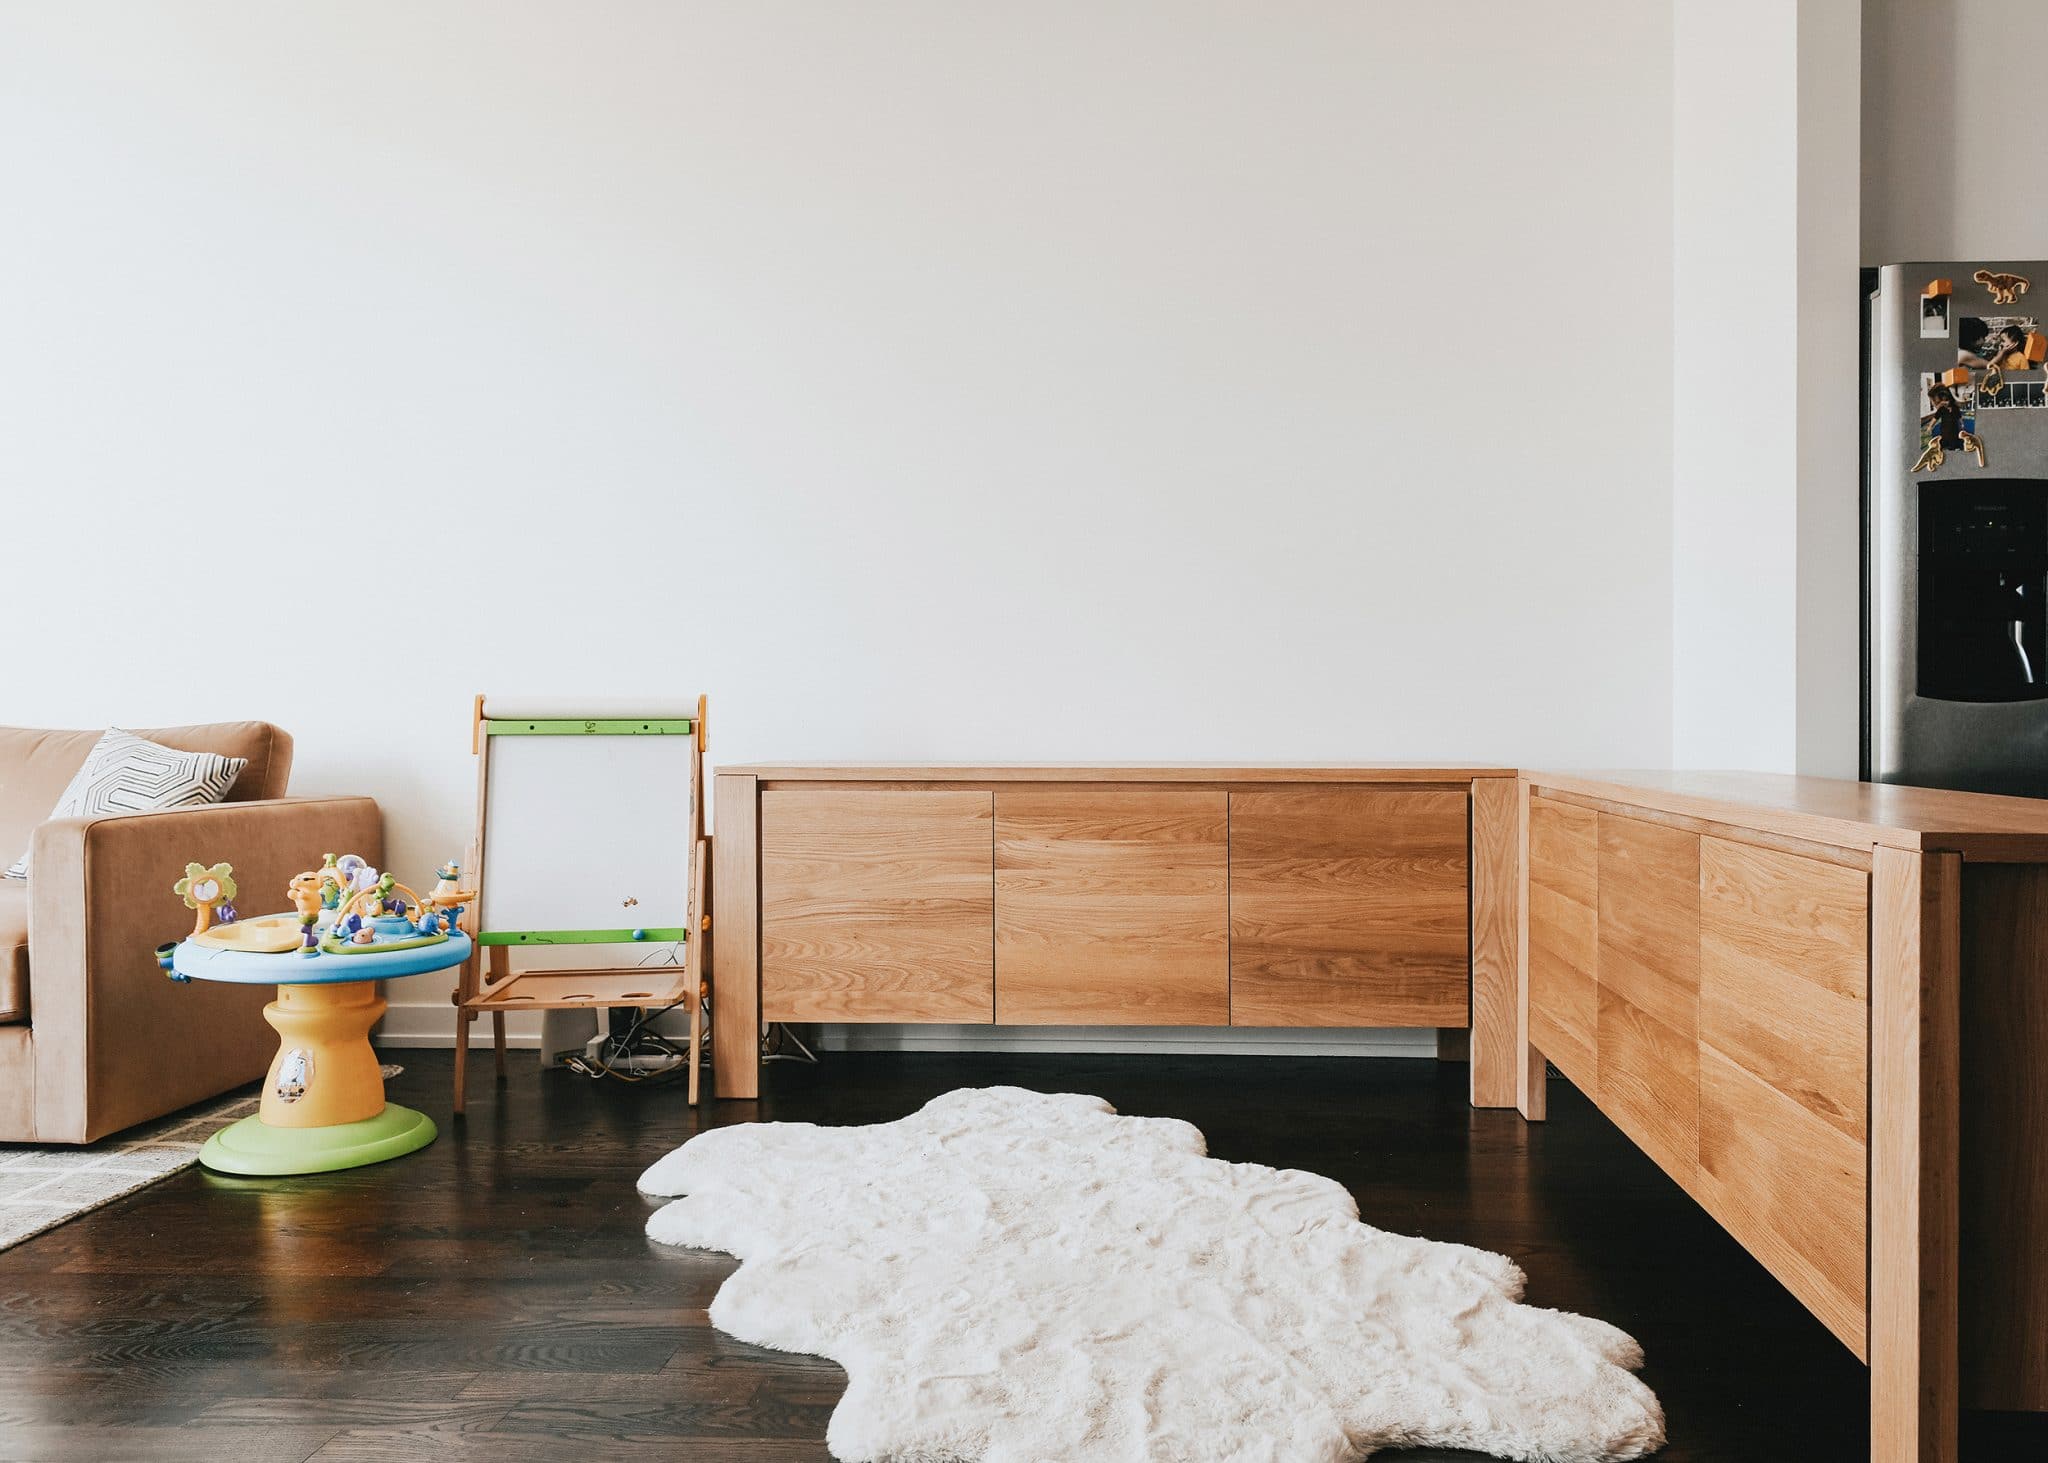 joining two sideboards together to create an L-shape | play nook inspiration in an open concept home | via Yellow Brick Home